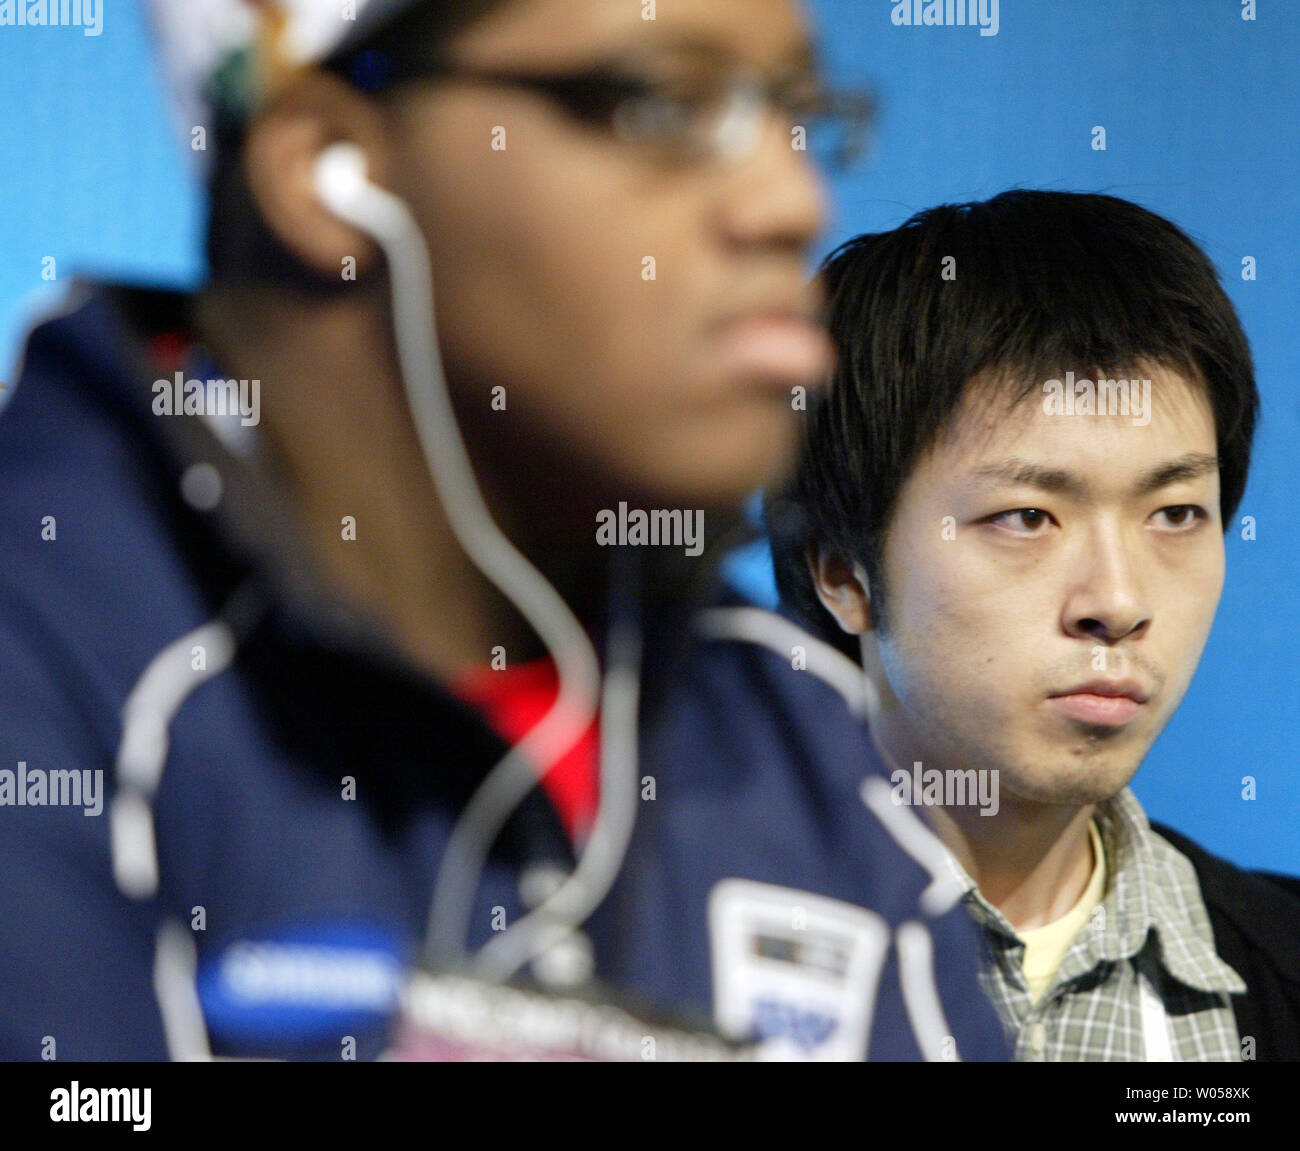 Tomoyuki Inui (R), of Japan, watches the screen as he plays Jeremy Florence, of the United States in 'Dead or Alive 4' during the World Cyber Games 2007 Grand Finals in Seattle on October 5, 2007. Over 700 players from 74 countries are participating in the four day grand finals for medals, prizes and 00,000. Florence beat Inui to advance in competition. (UPI Photo/Jim Bryant). Stock Photo